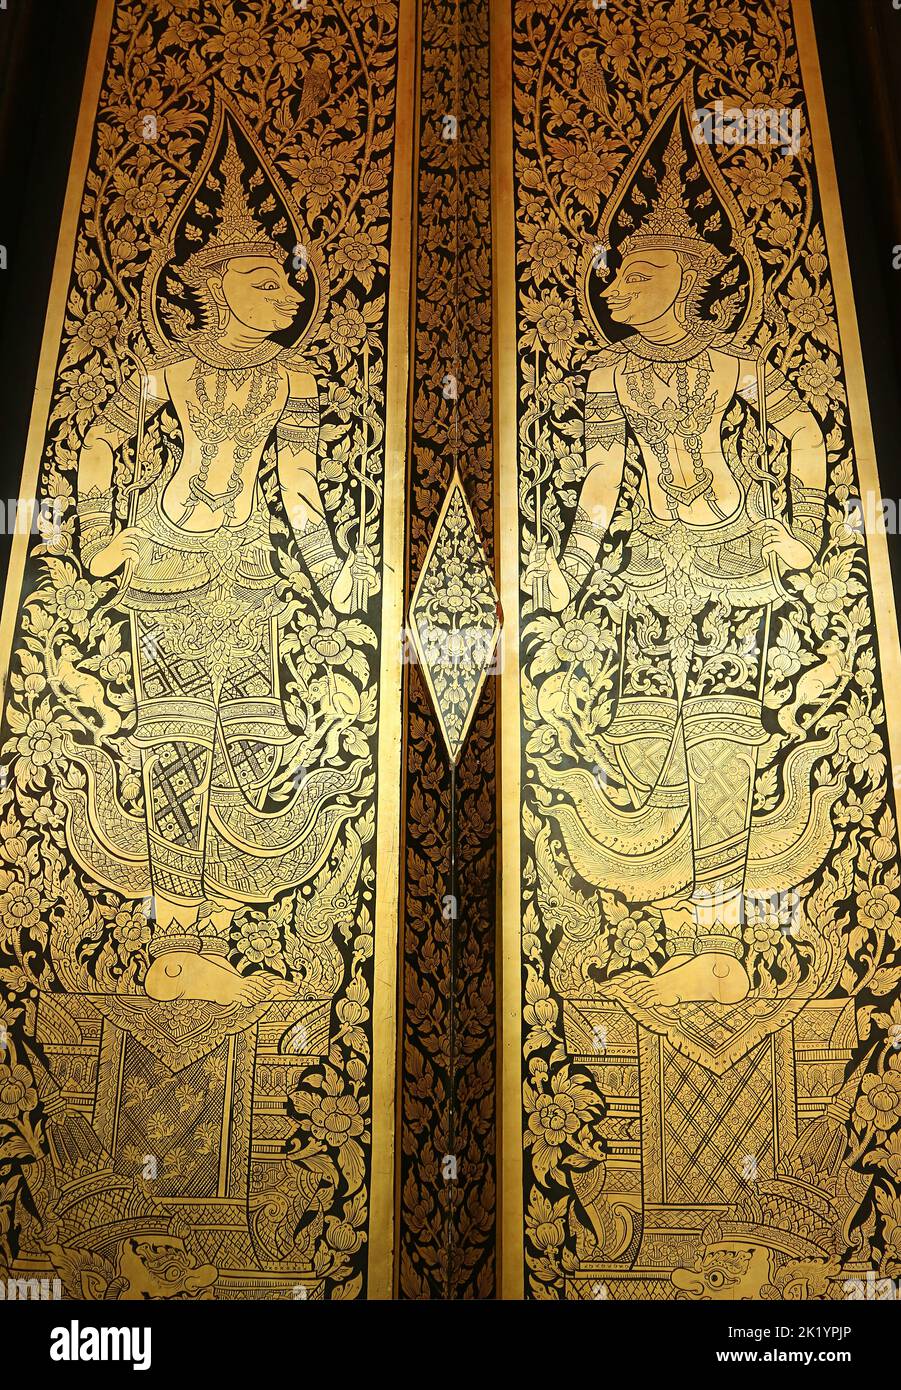 Incredible Gilded Black Lacquer Door Panel of the Ordinary Hall of a Buddhist Temple in Thailand Stock Photo